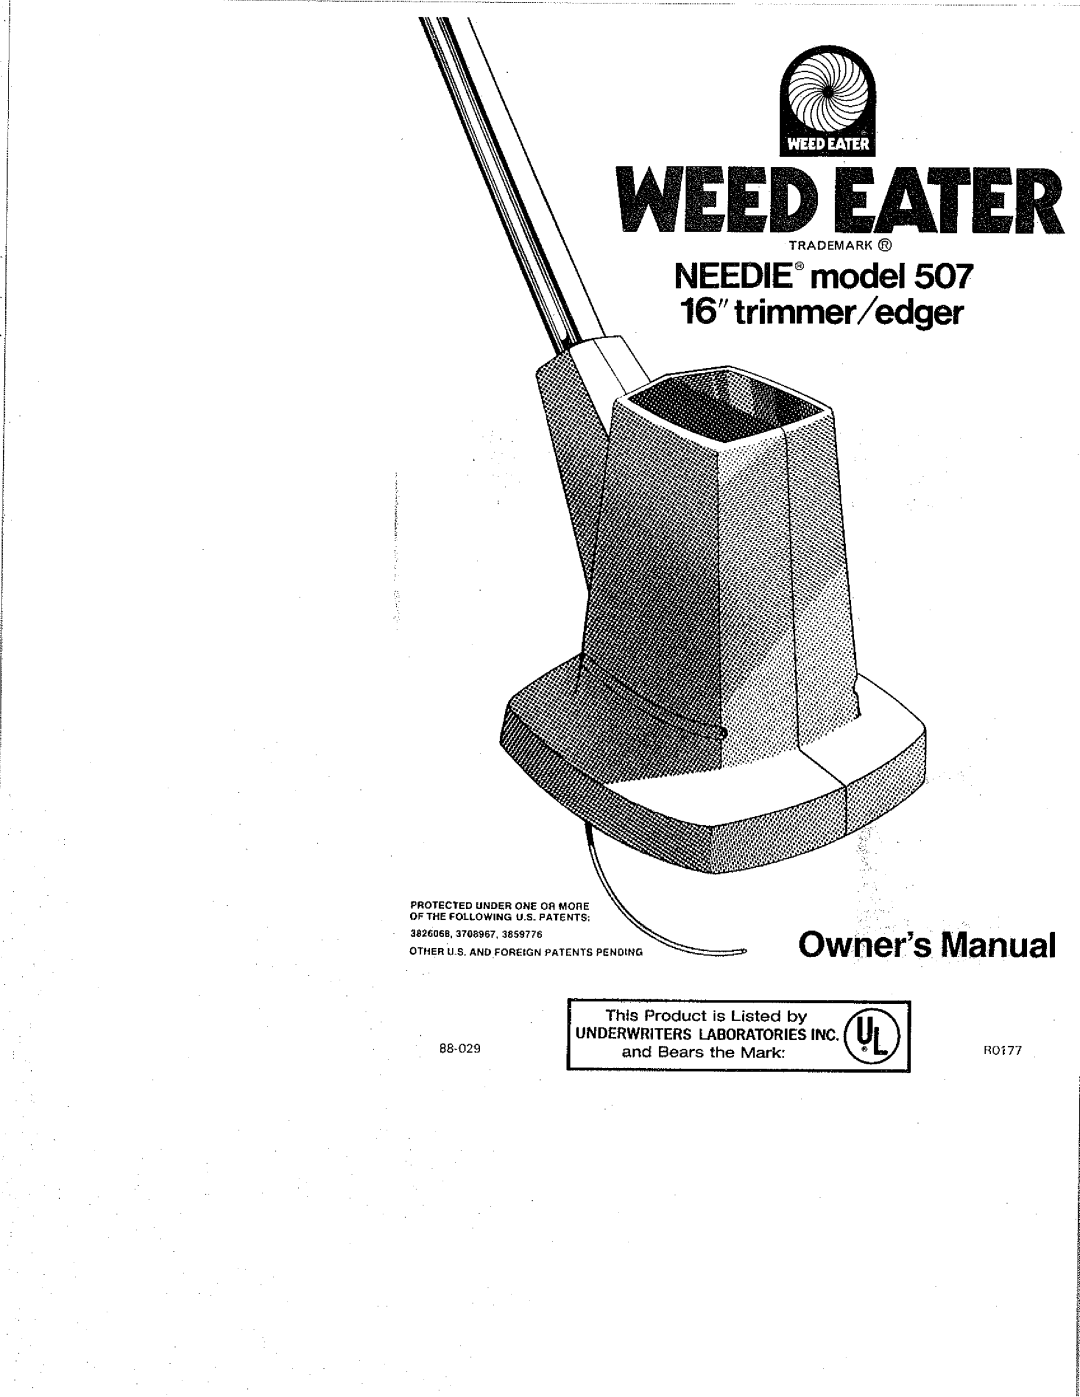 Weed Eater 88-029, RD177, 507 manual 